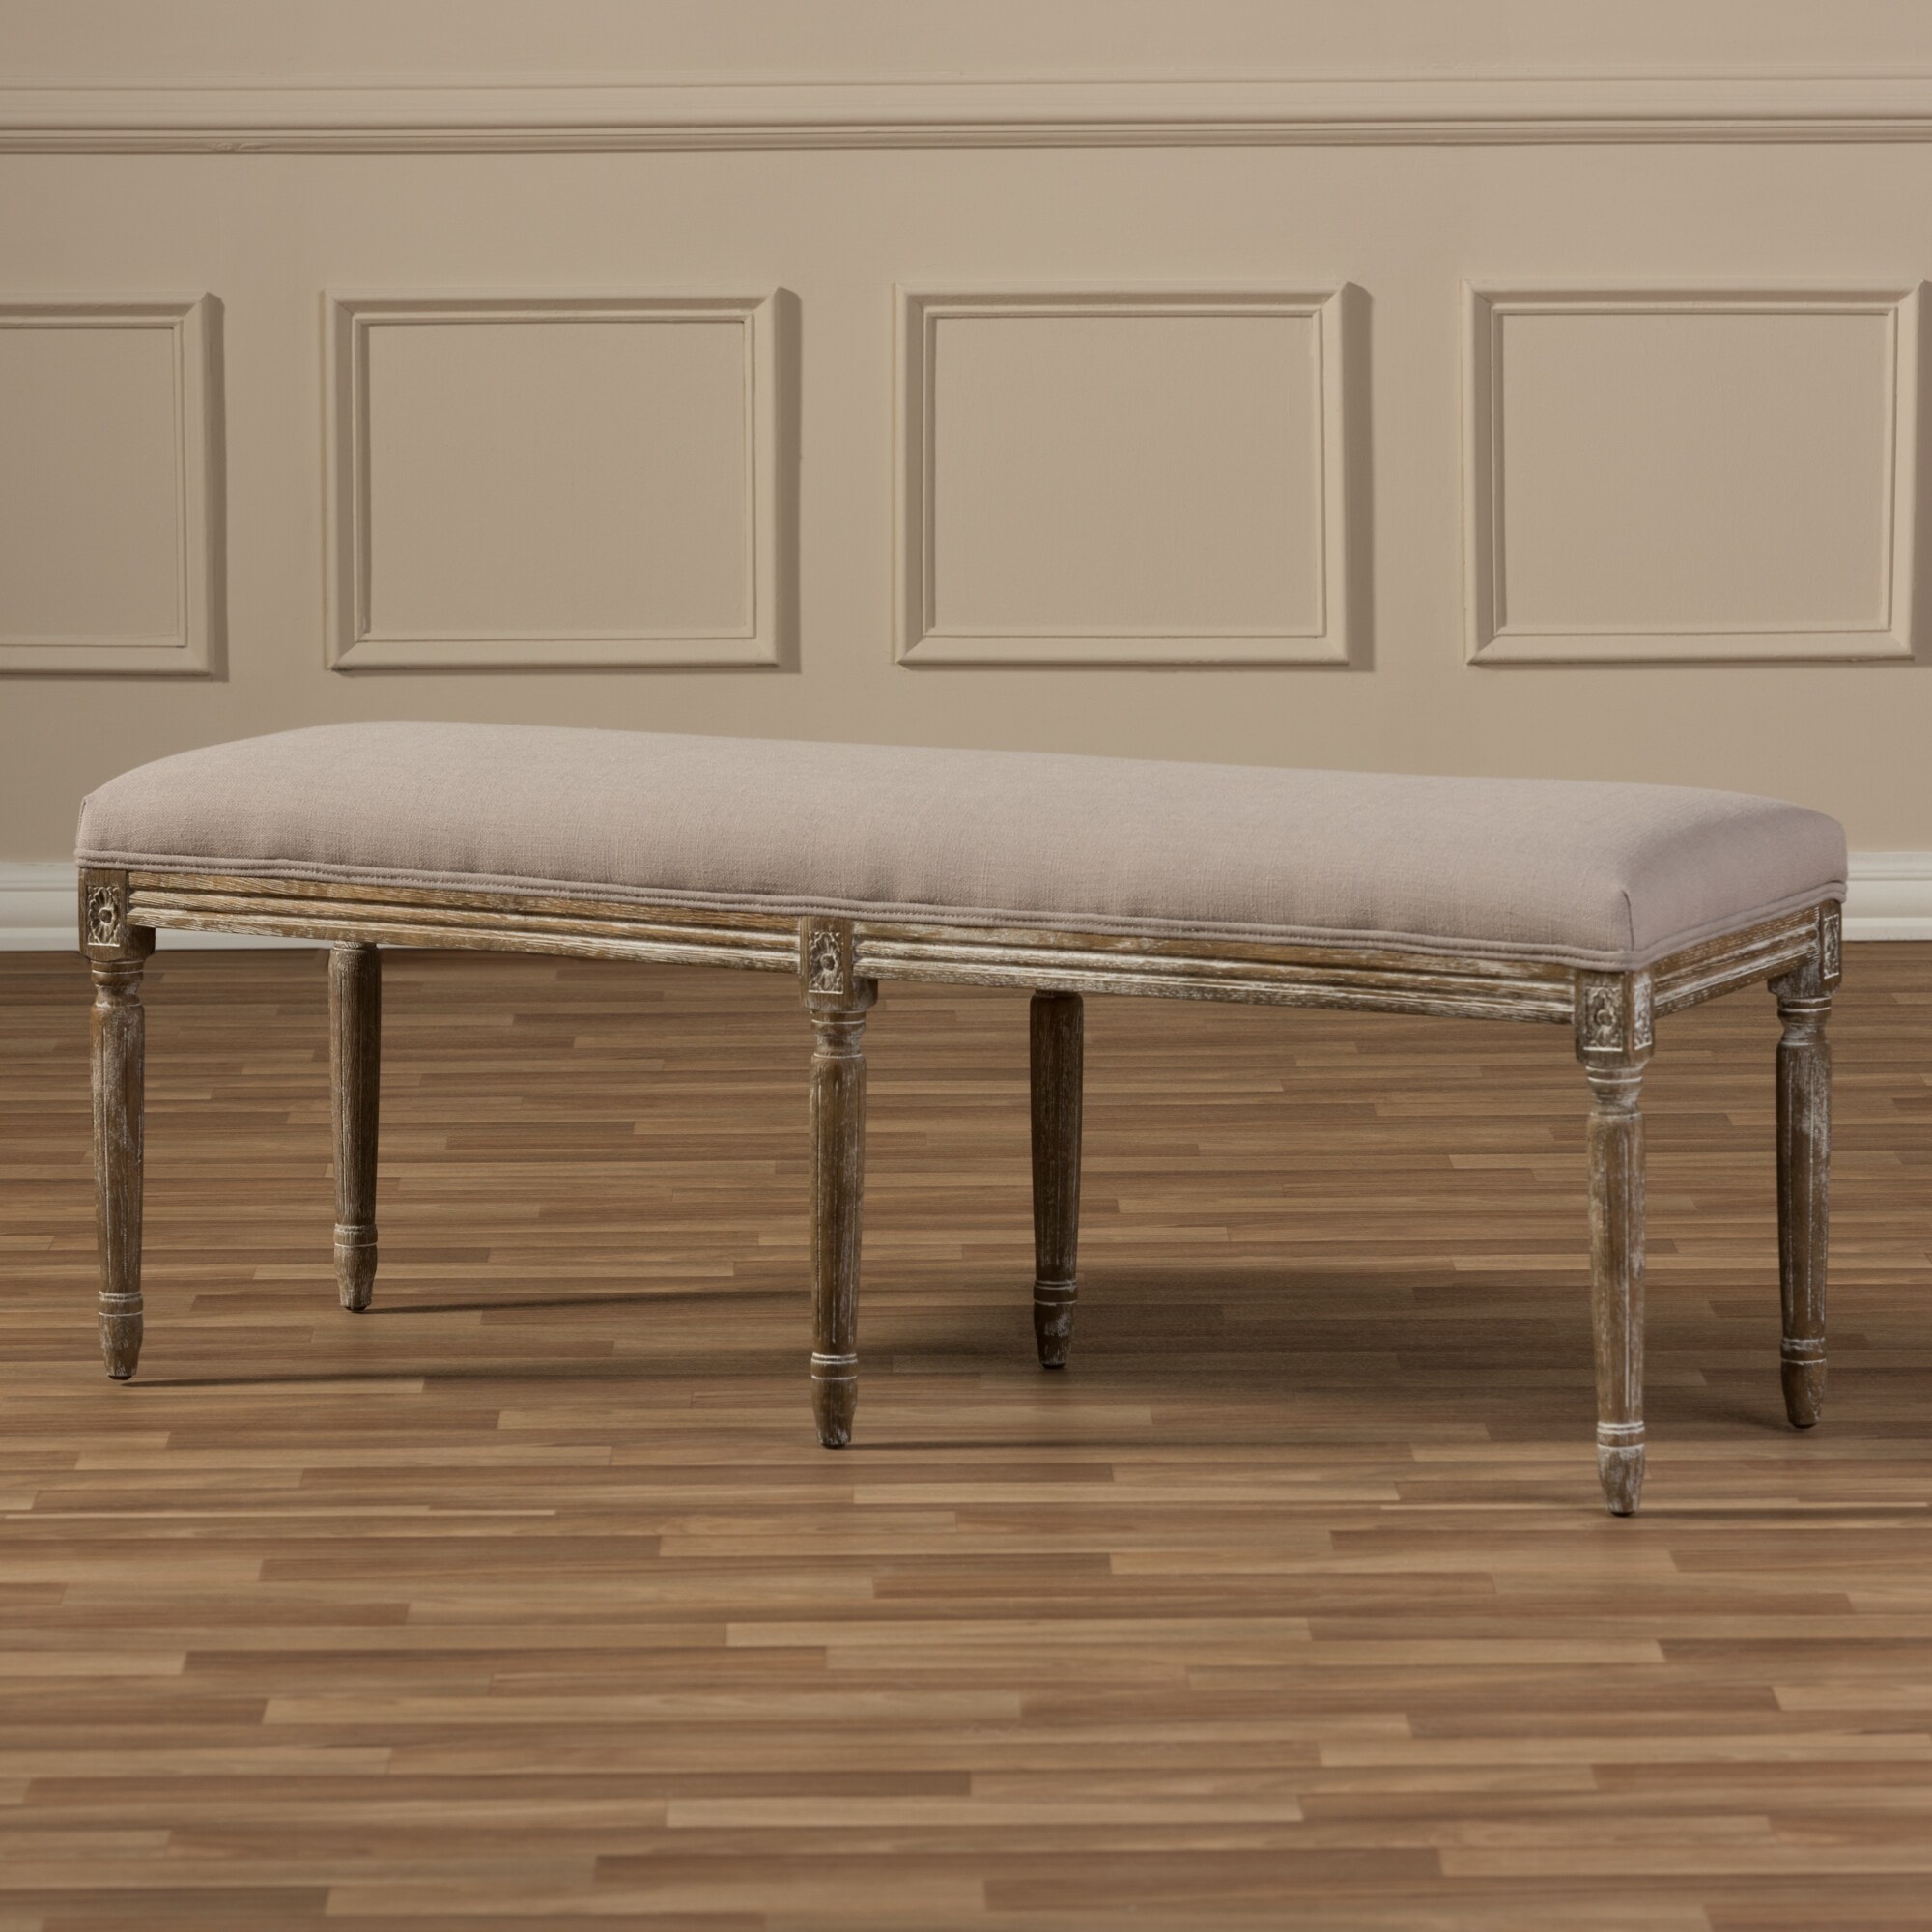 Clairette Wood Traditional French Bench